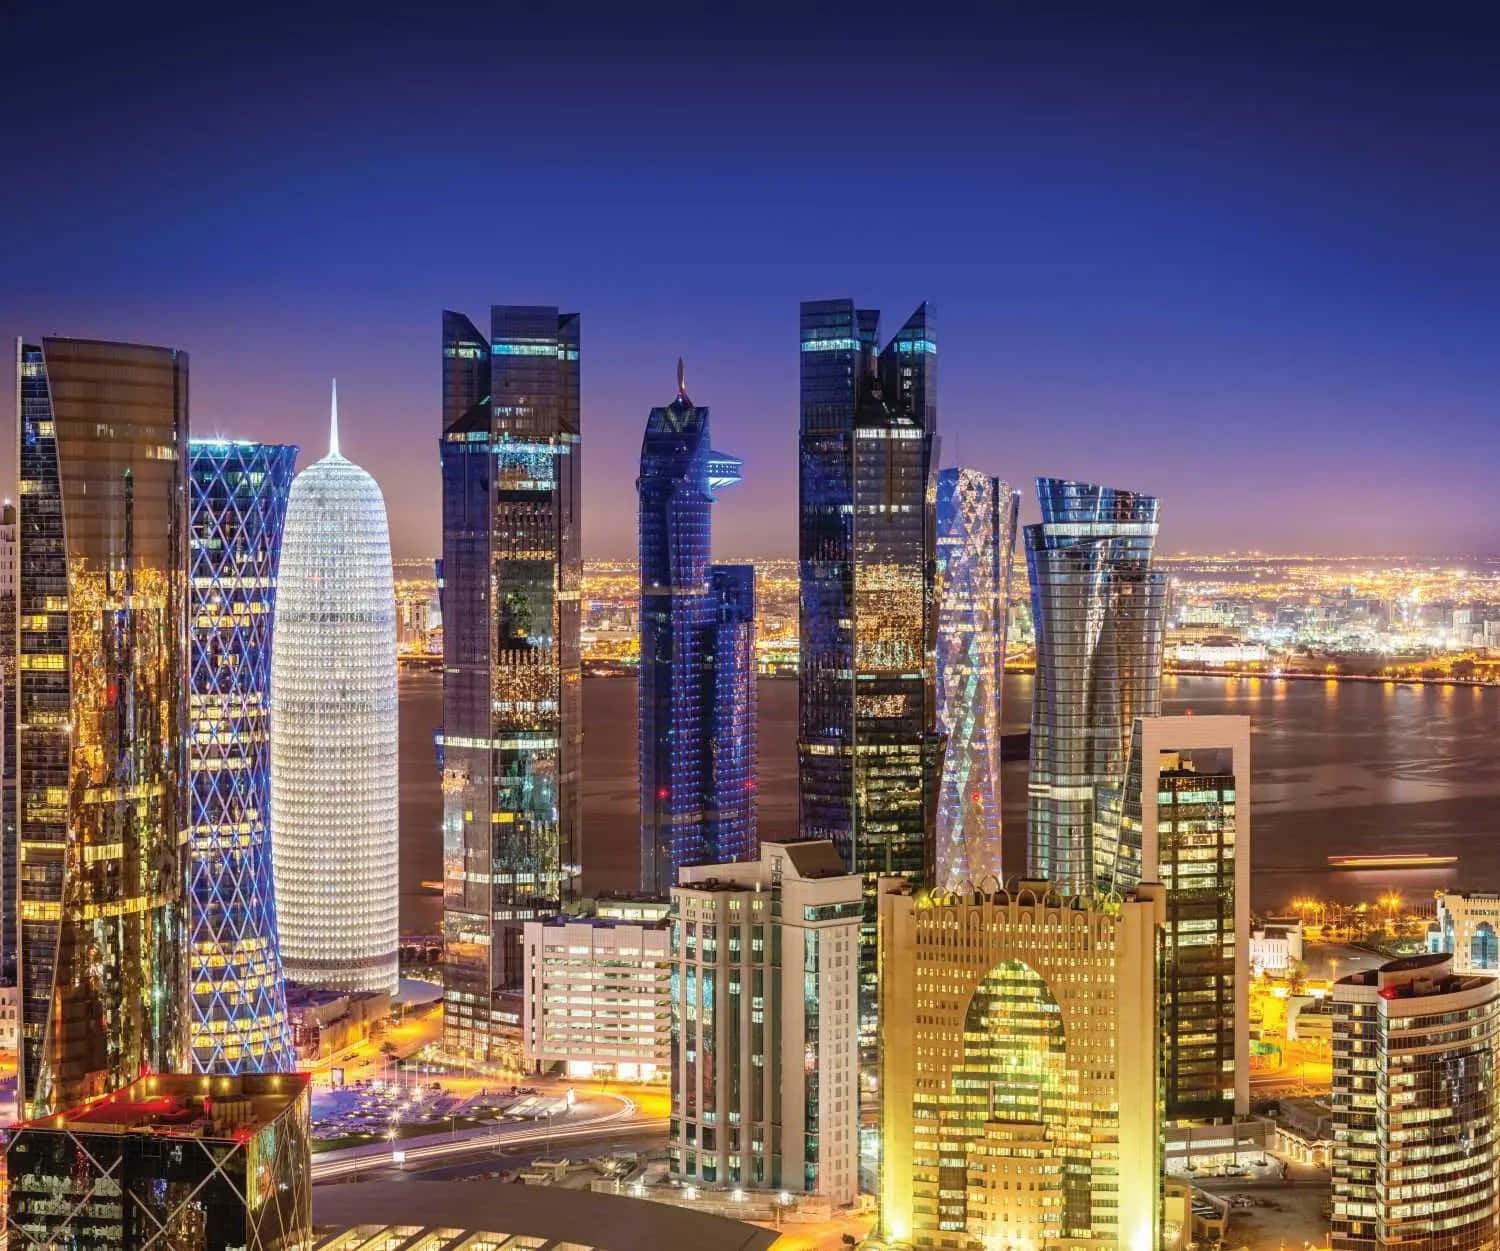 View of the magnificent skyscrapers in Doha, Qatar.